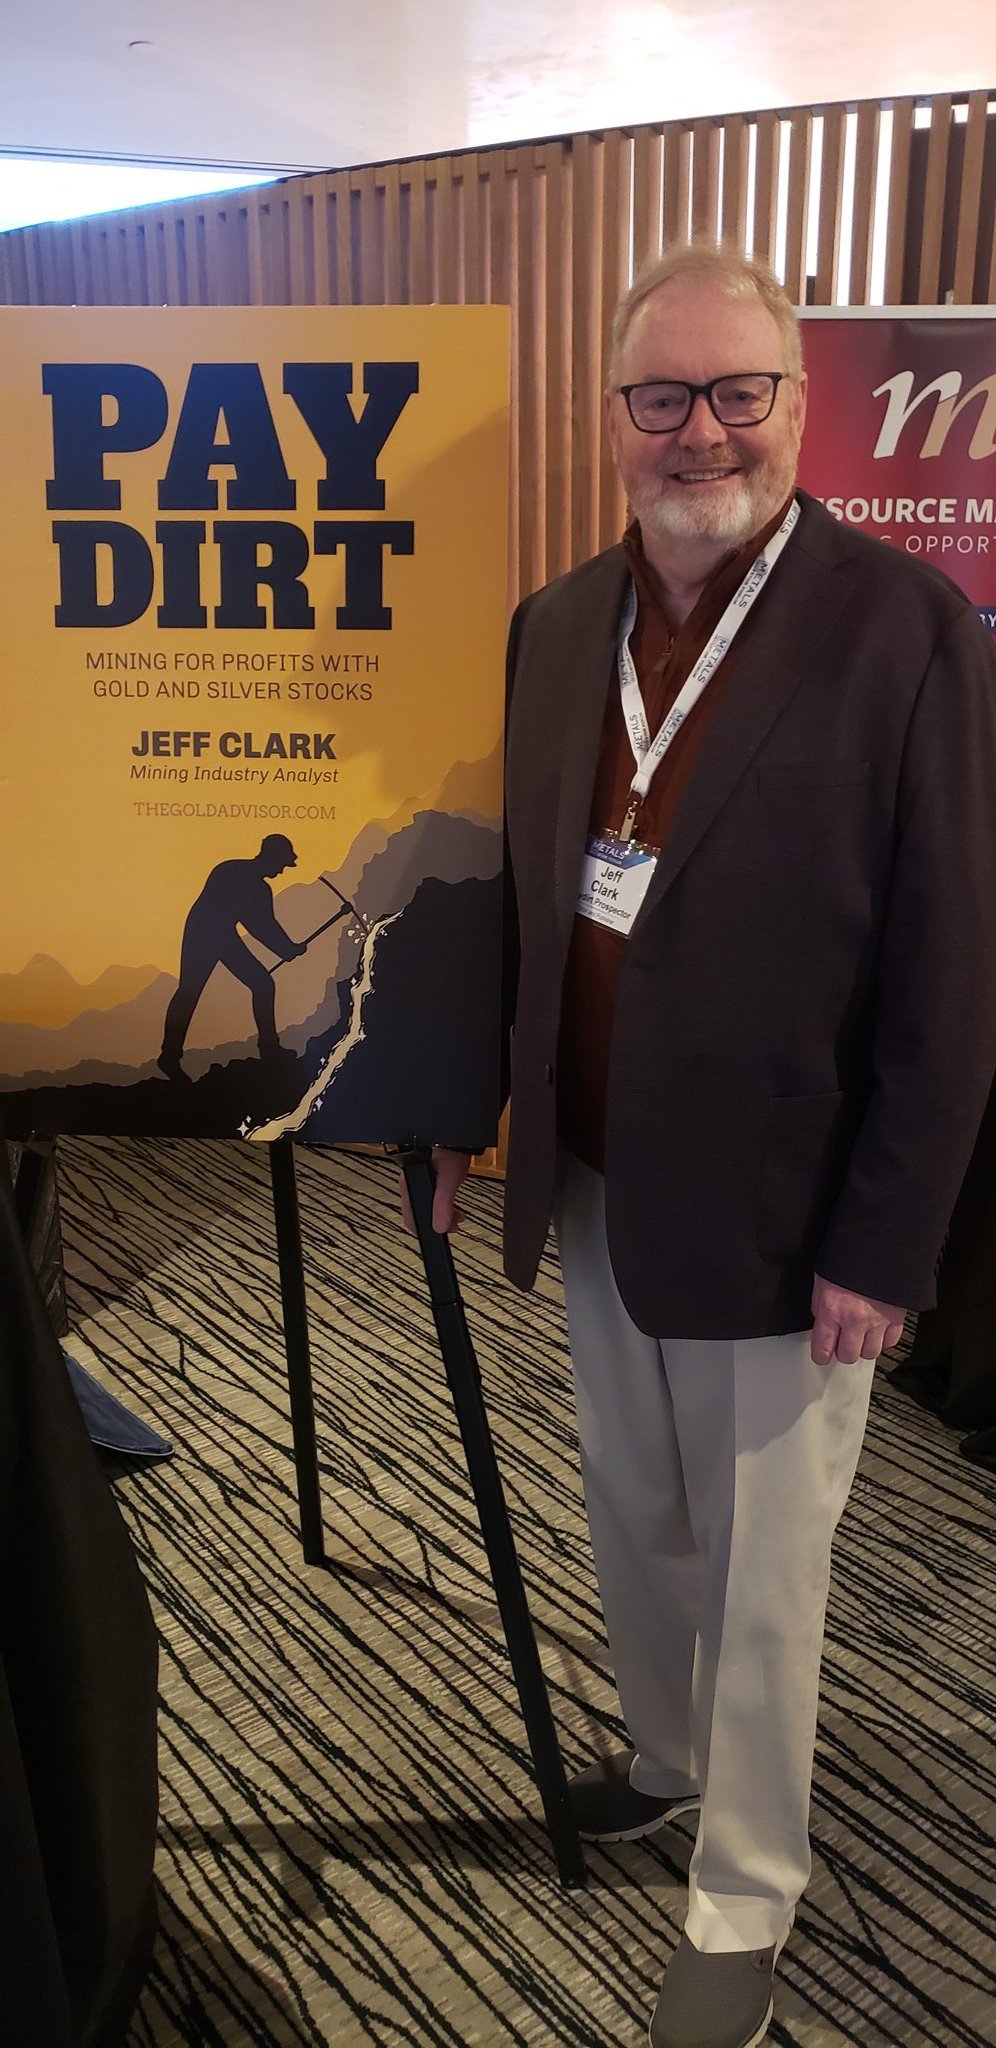 PAYDIRT: Mining for Profits with Gold & Silver Stocks by Jeff Clark